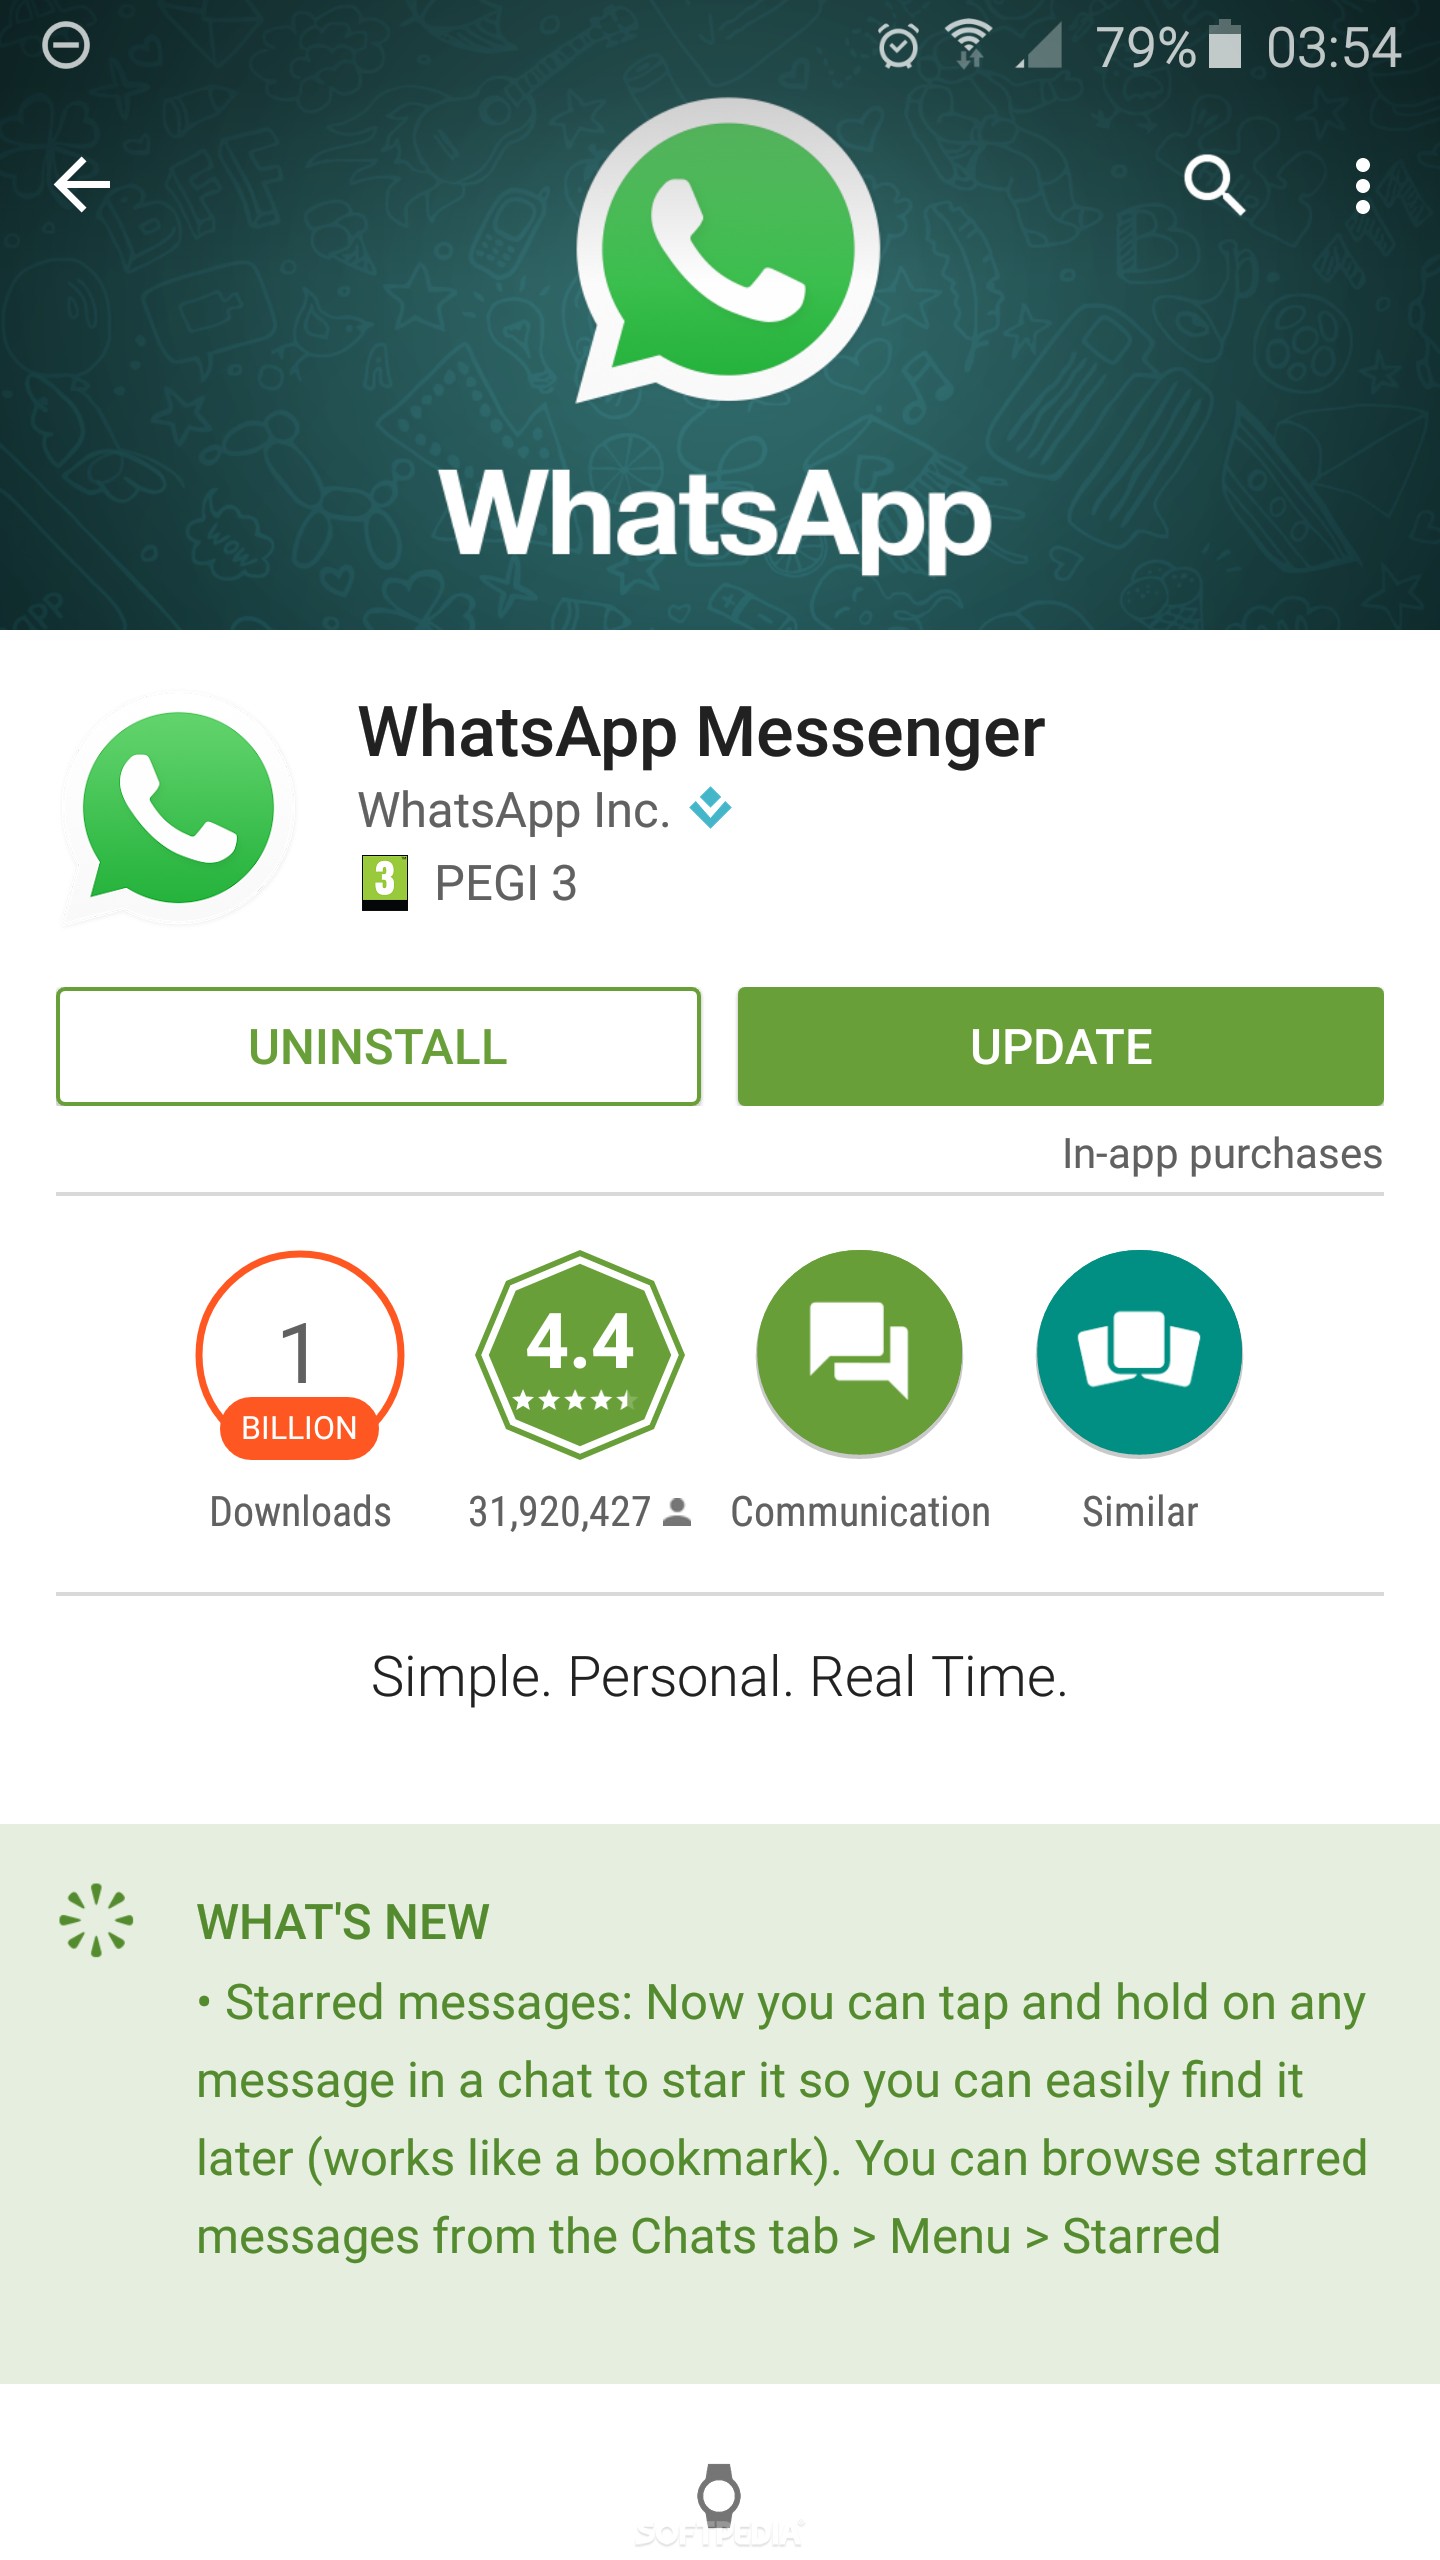 download messenger to my phone